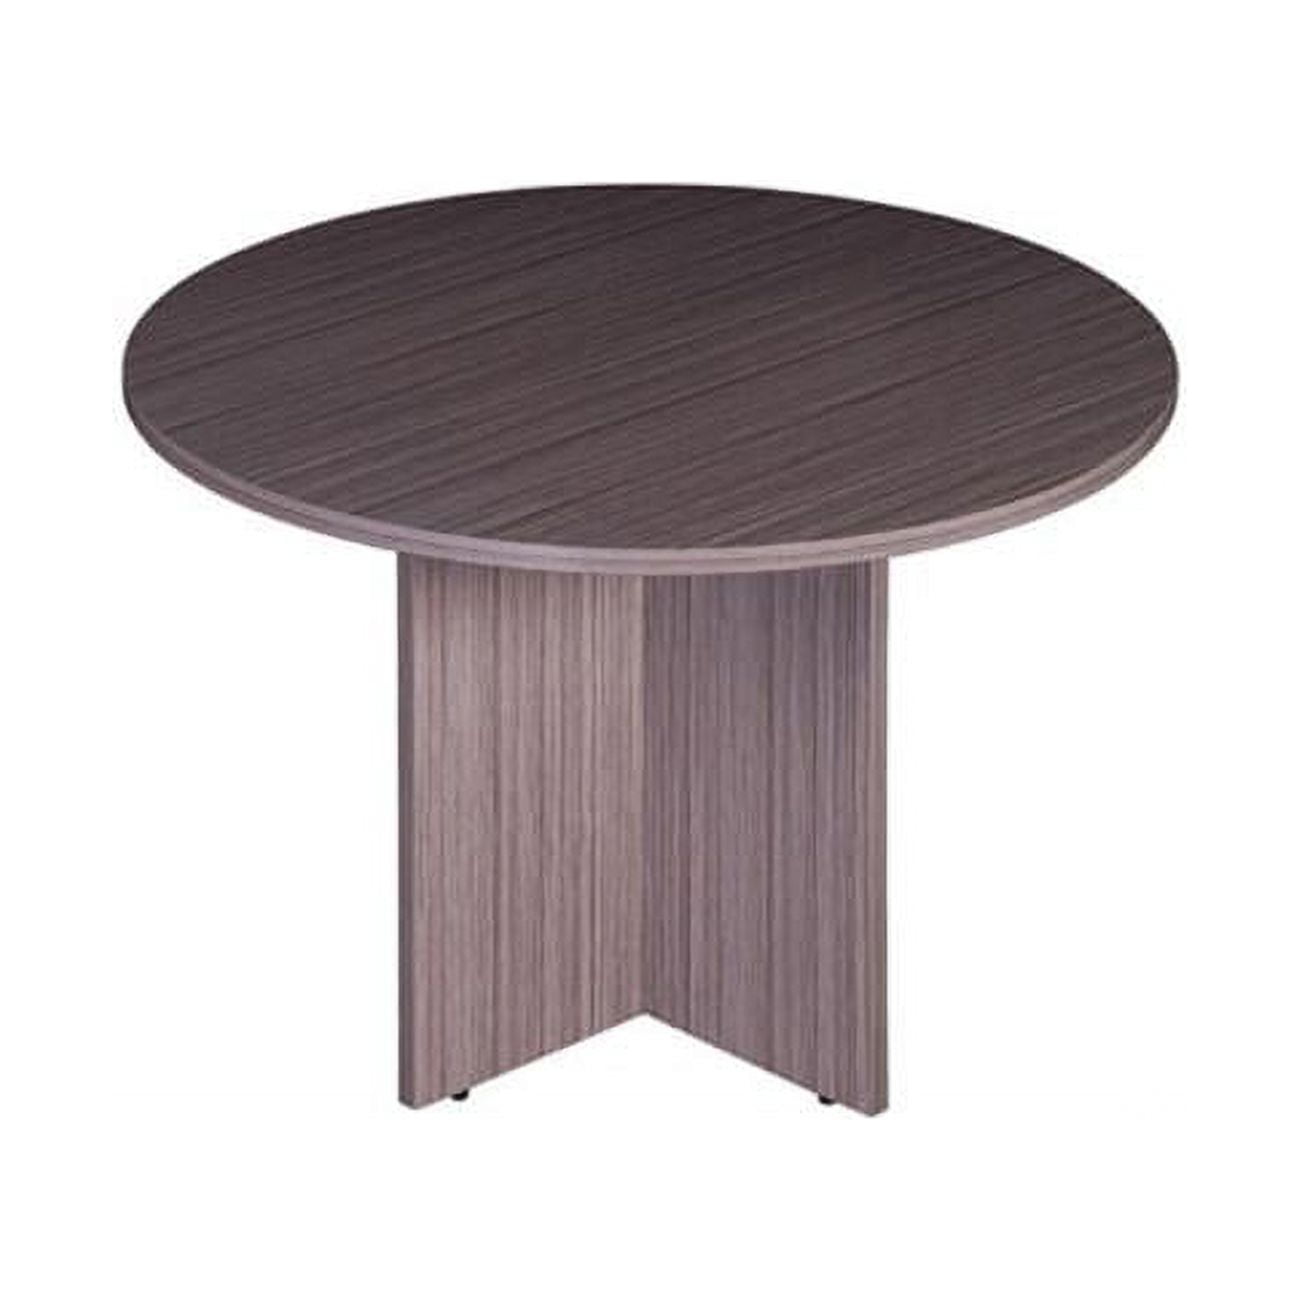 N123-dw 47 In. Round Table, Driftwood